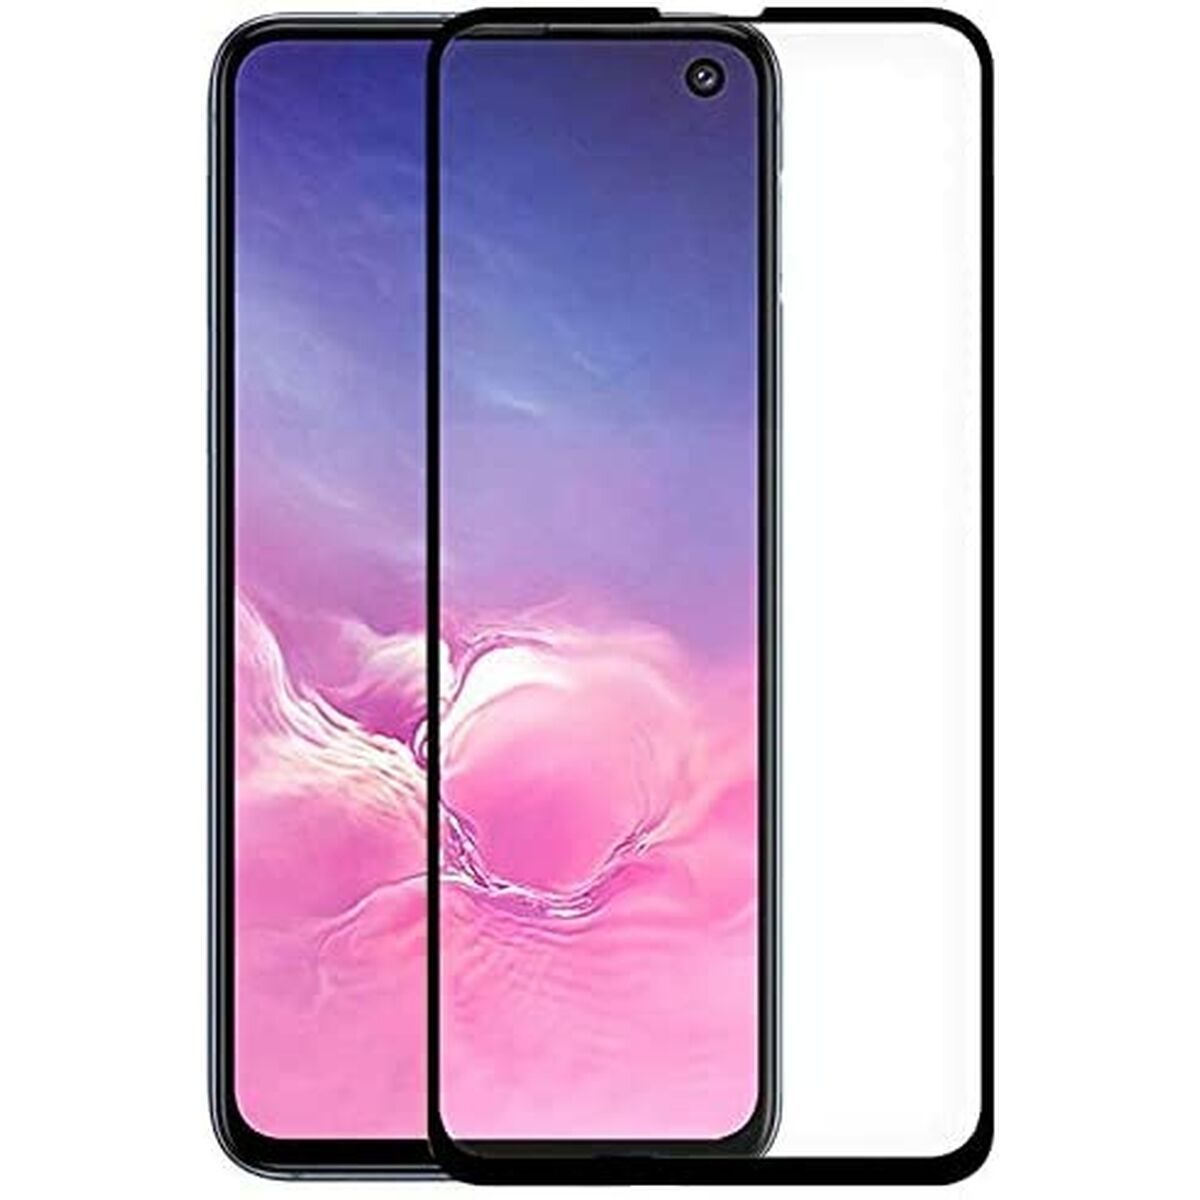 3D Tempered Glass Screen Protector Cool Galaxy S10e